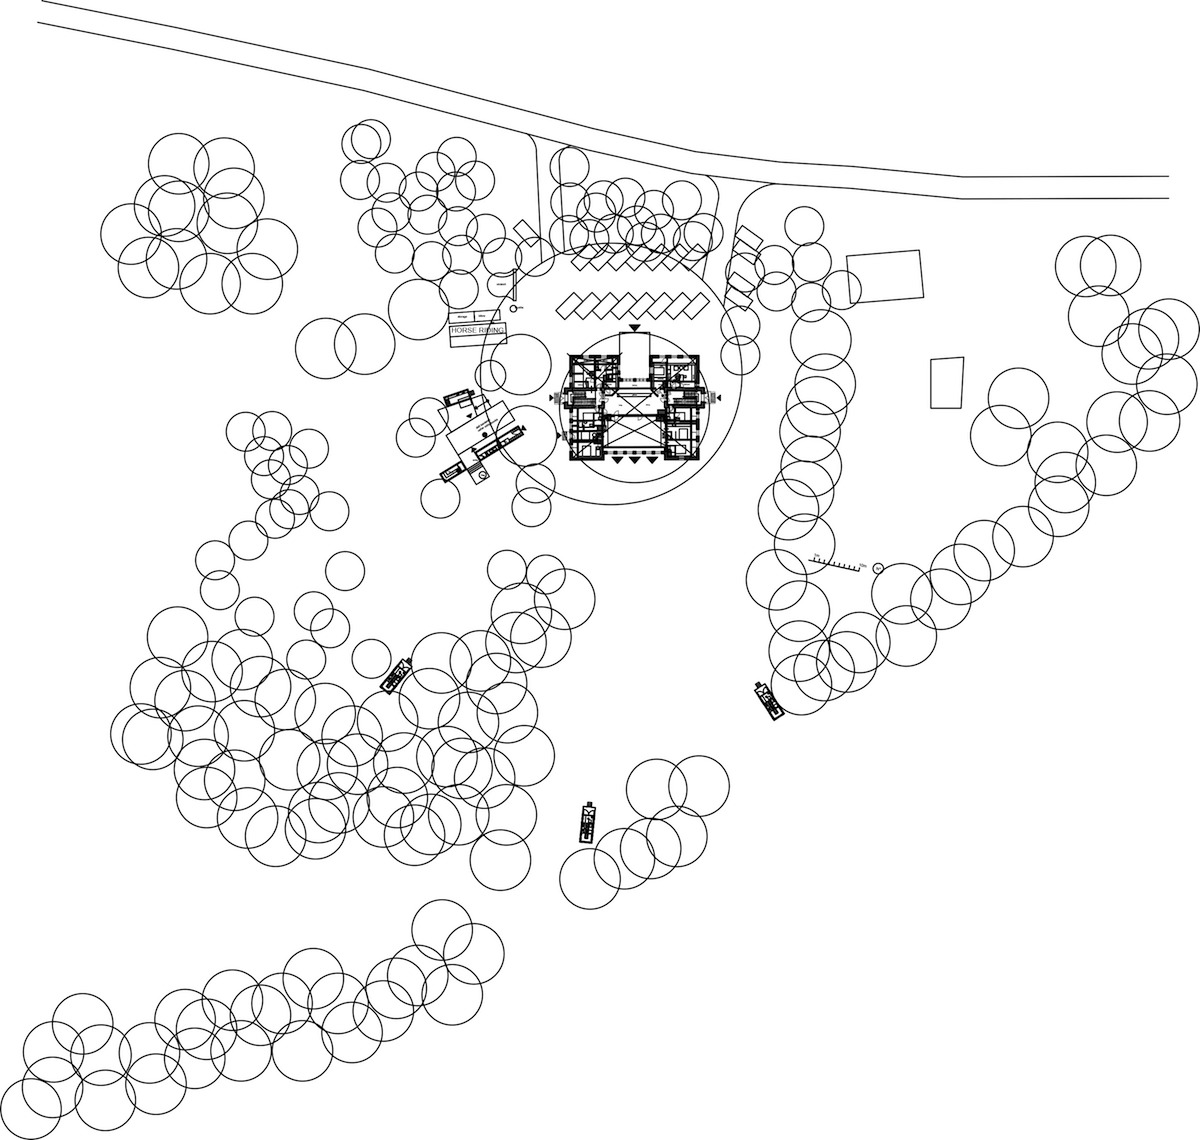 Phase III. site plan